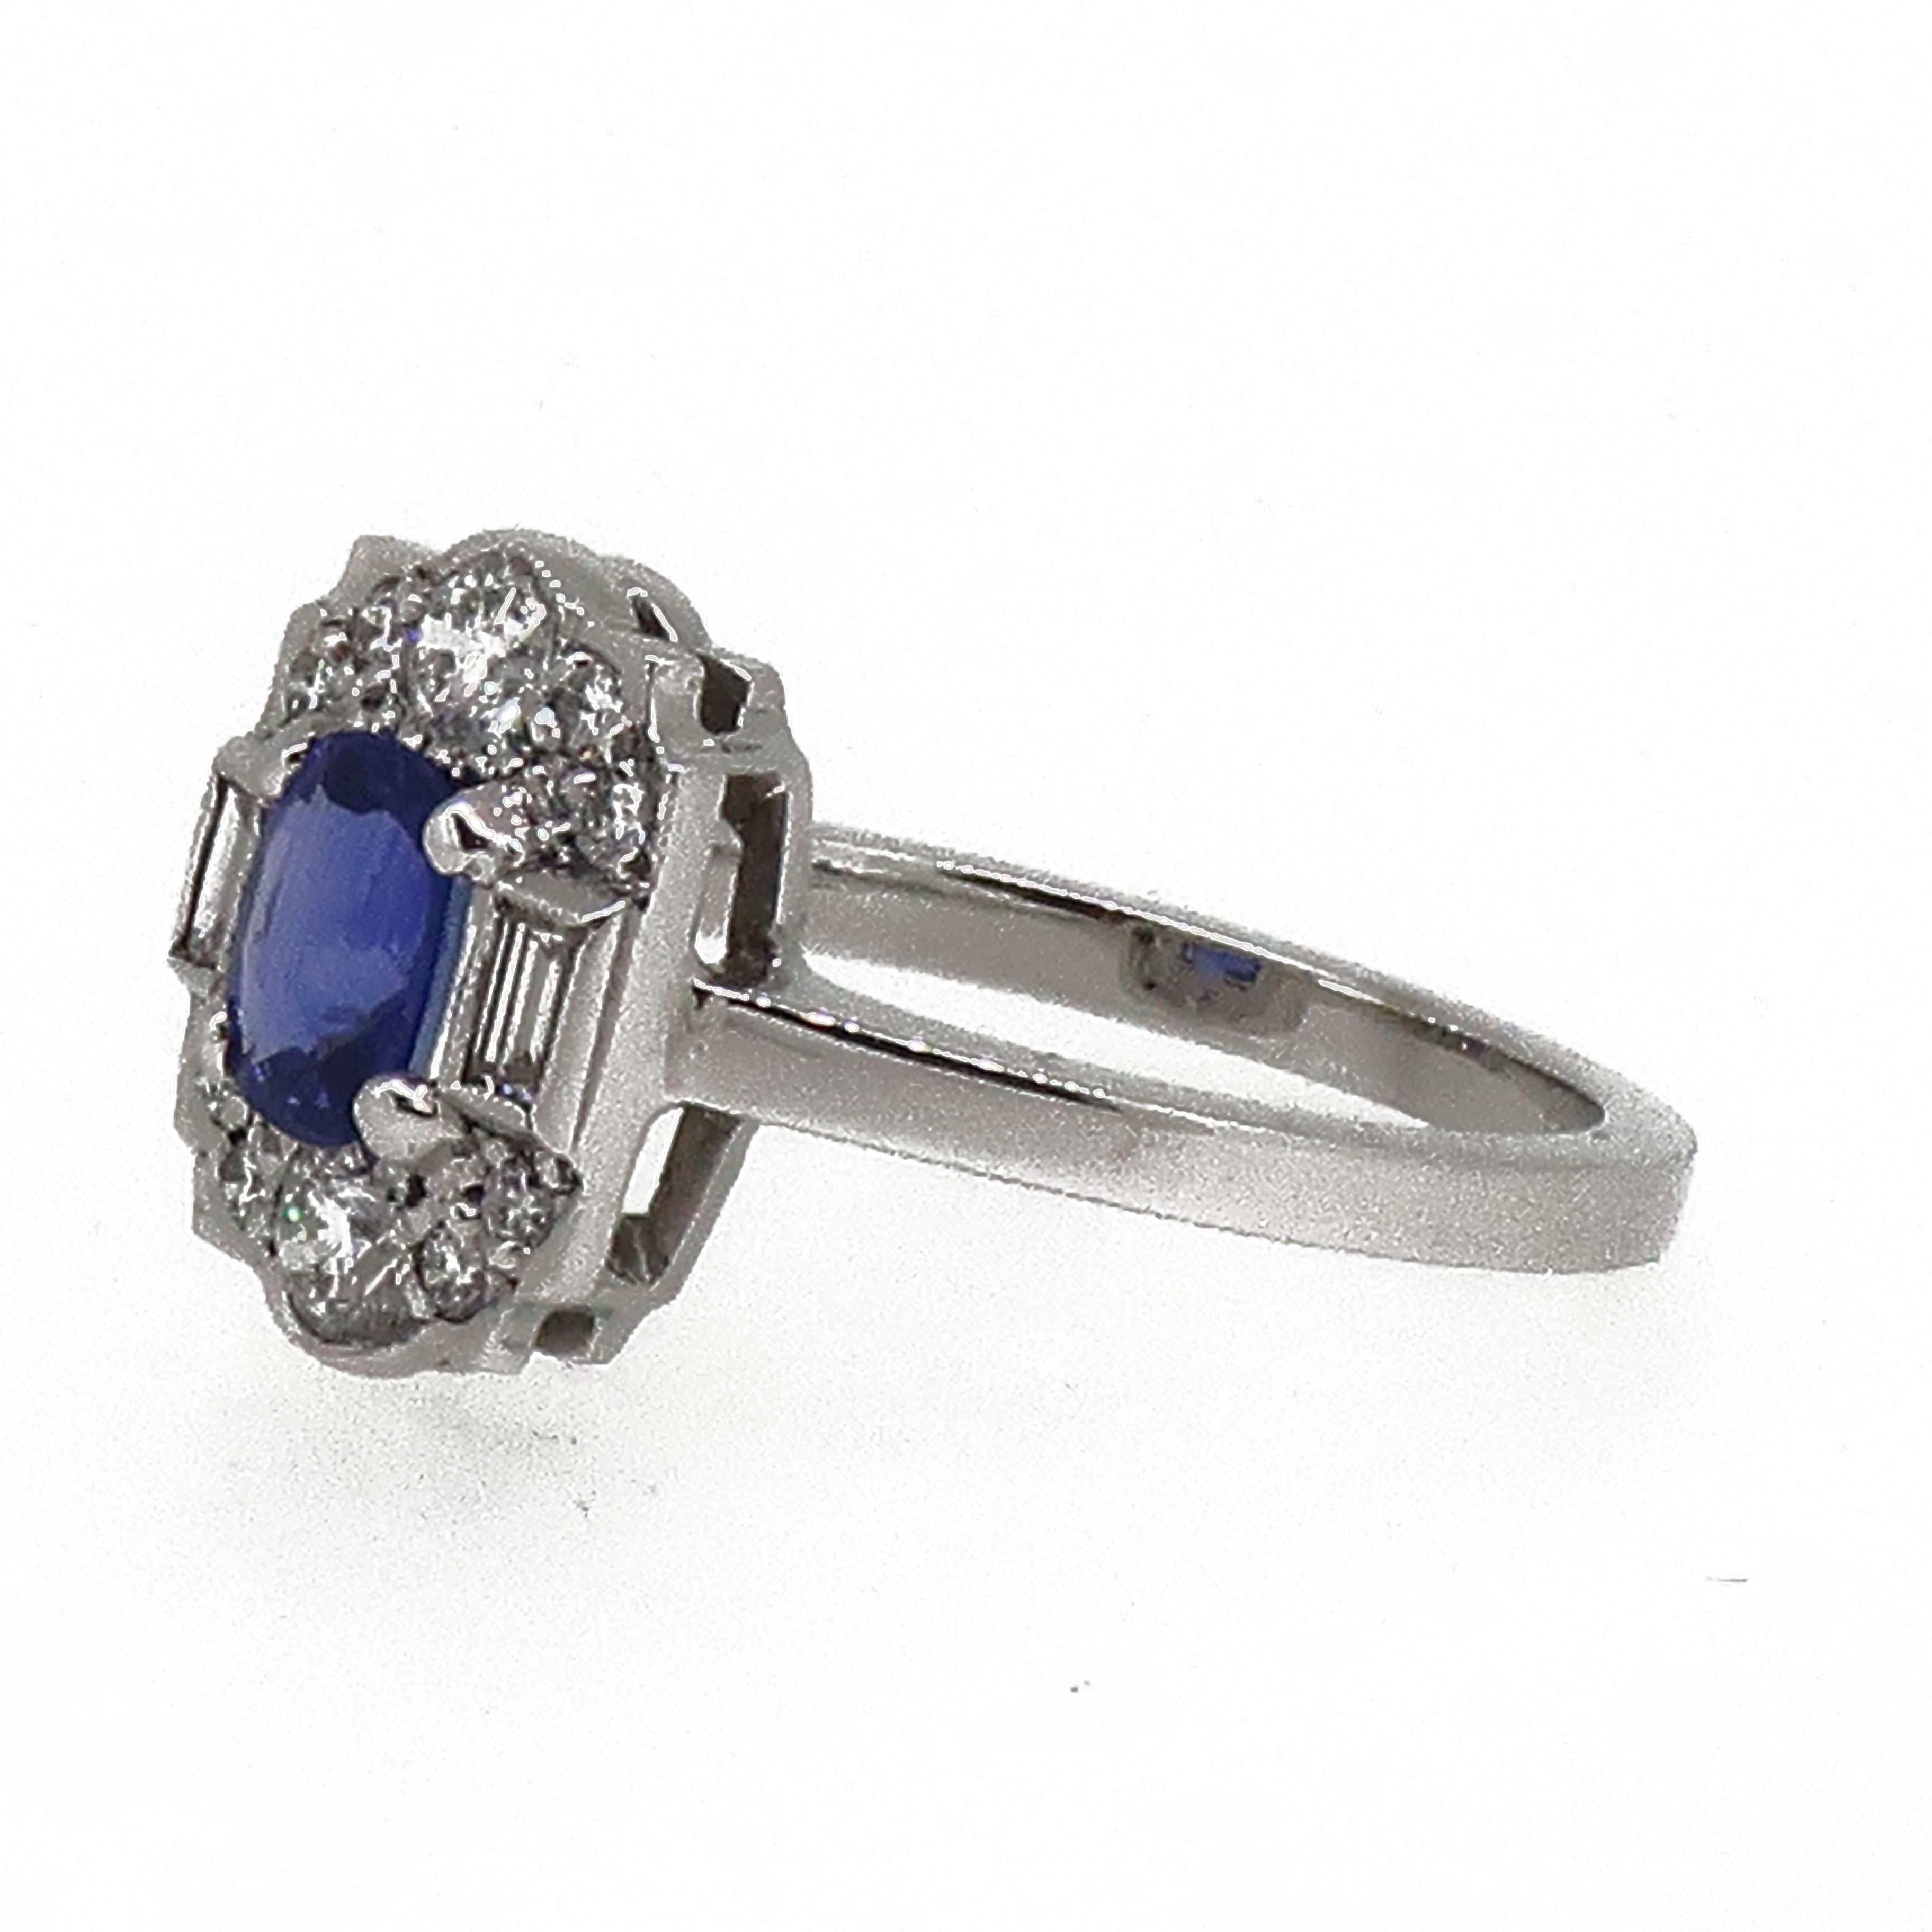 18 Karat Gold Cushion Sapphire & Diamond Art Deco Style Cluster Ring

A royal blue cushion cut sapphire, weighing 0.67ct. This lustrous ring consists of baguette cut and brilliant cut diamonds, typical of the art deco era. Central sapphire is set in